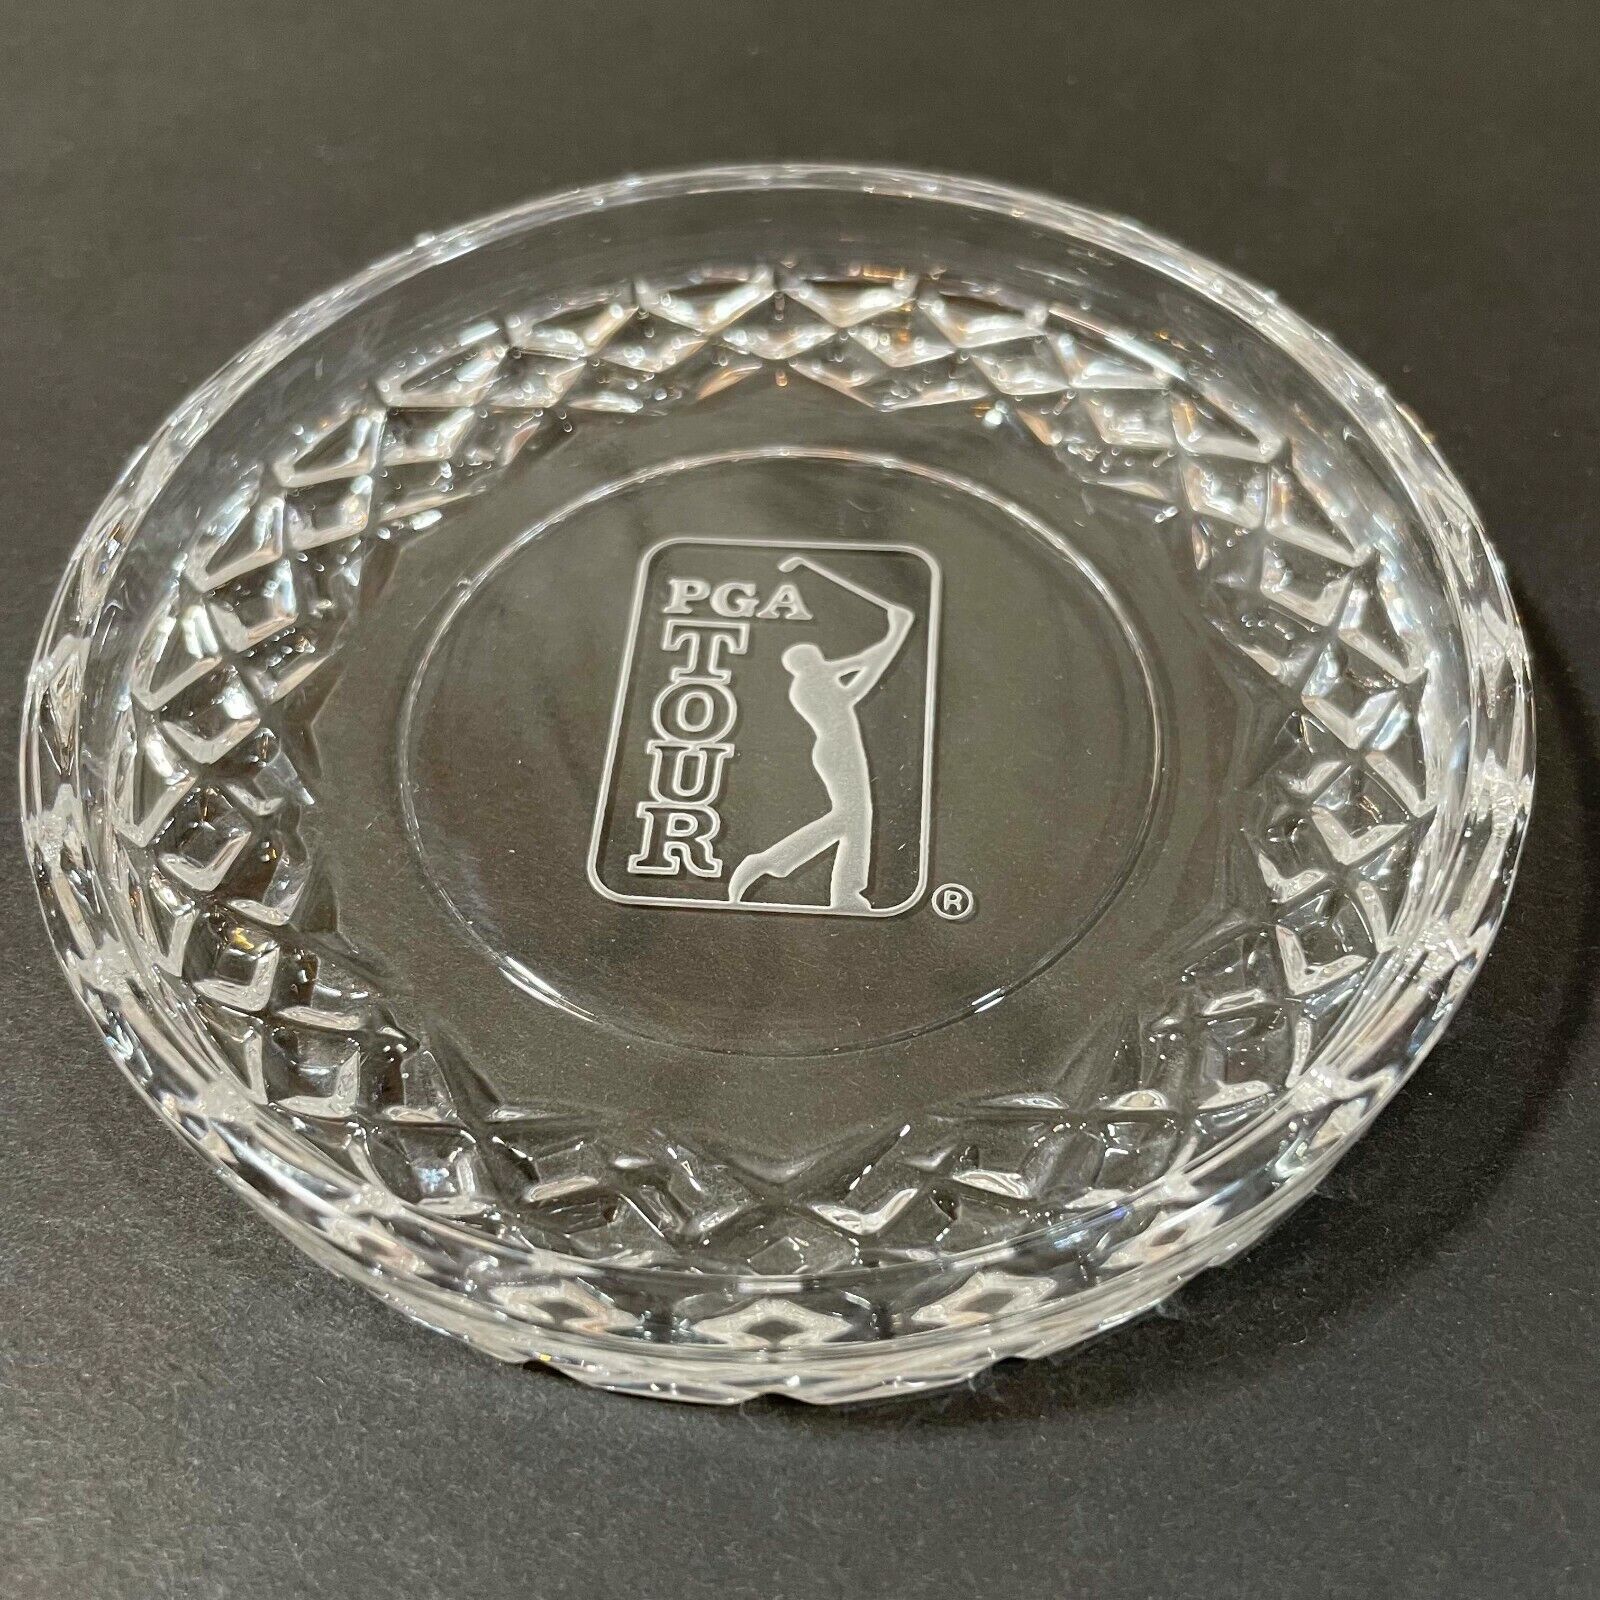 PGA Tour Glass Coaster Ashtray Paperweight Sterling Cut Glass Crystal - Round 4